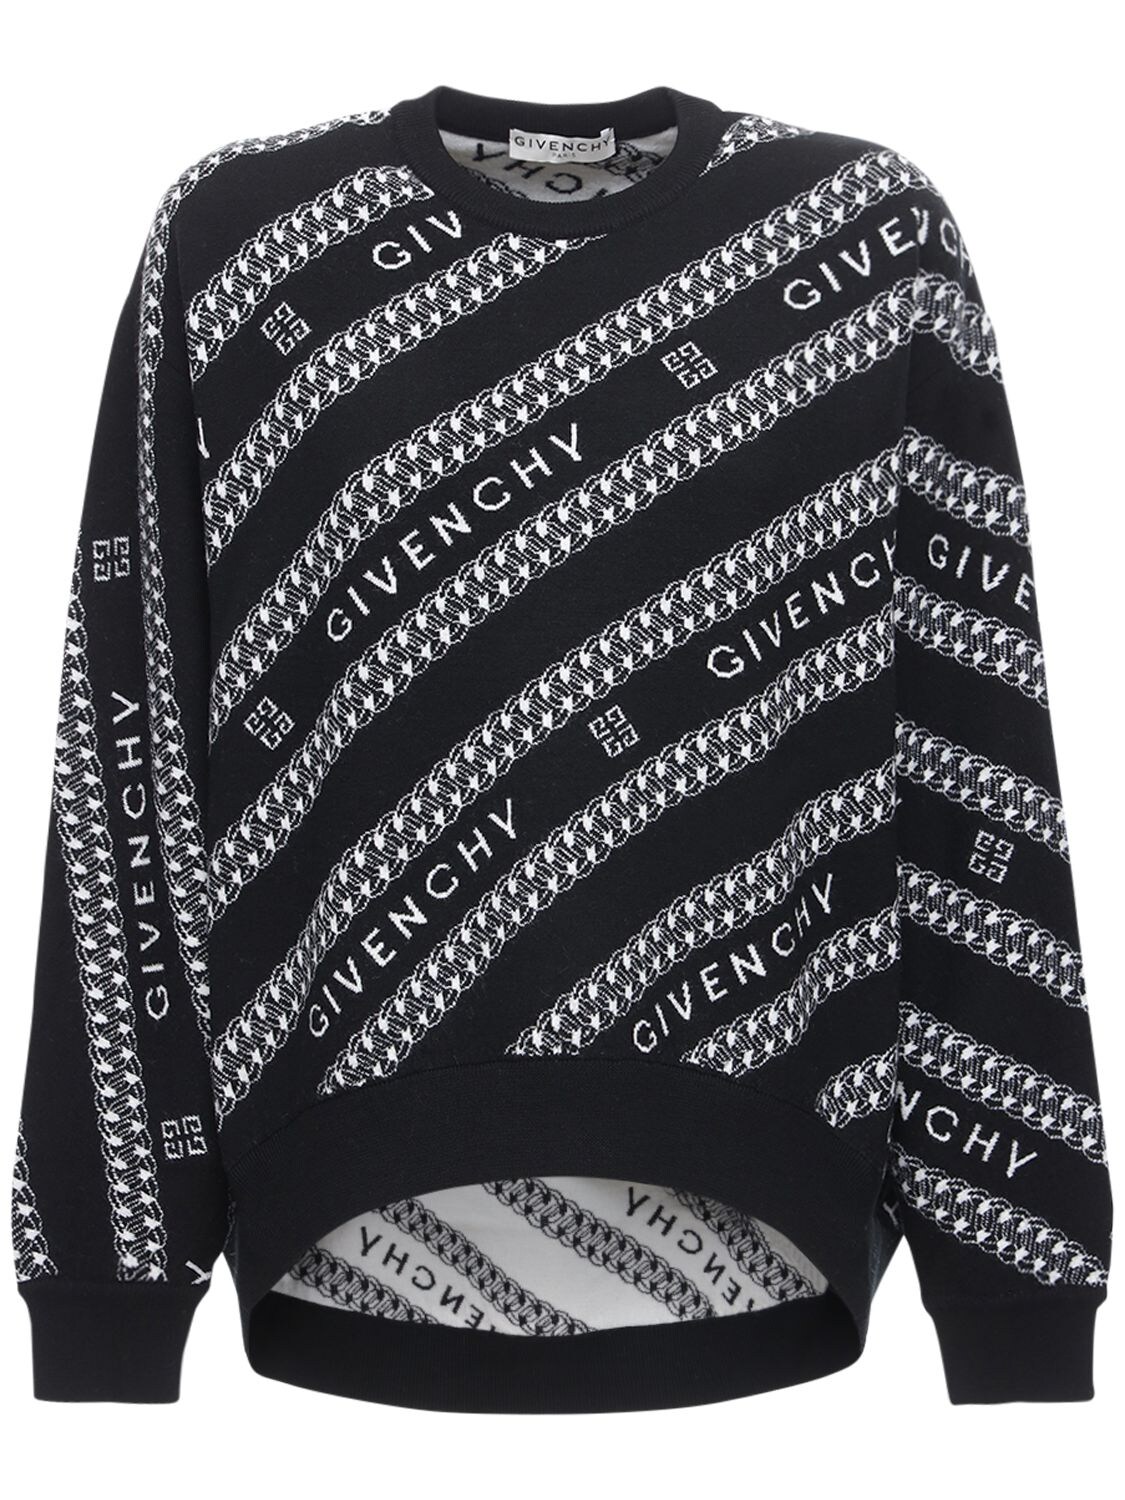 GIVENCHY OVERSIZE ALLOVER LOGO WOOL KNIT jumper,72IA7M002-MDA00